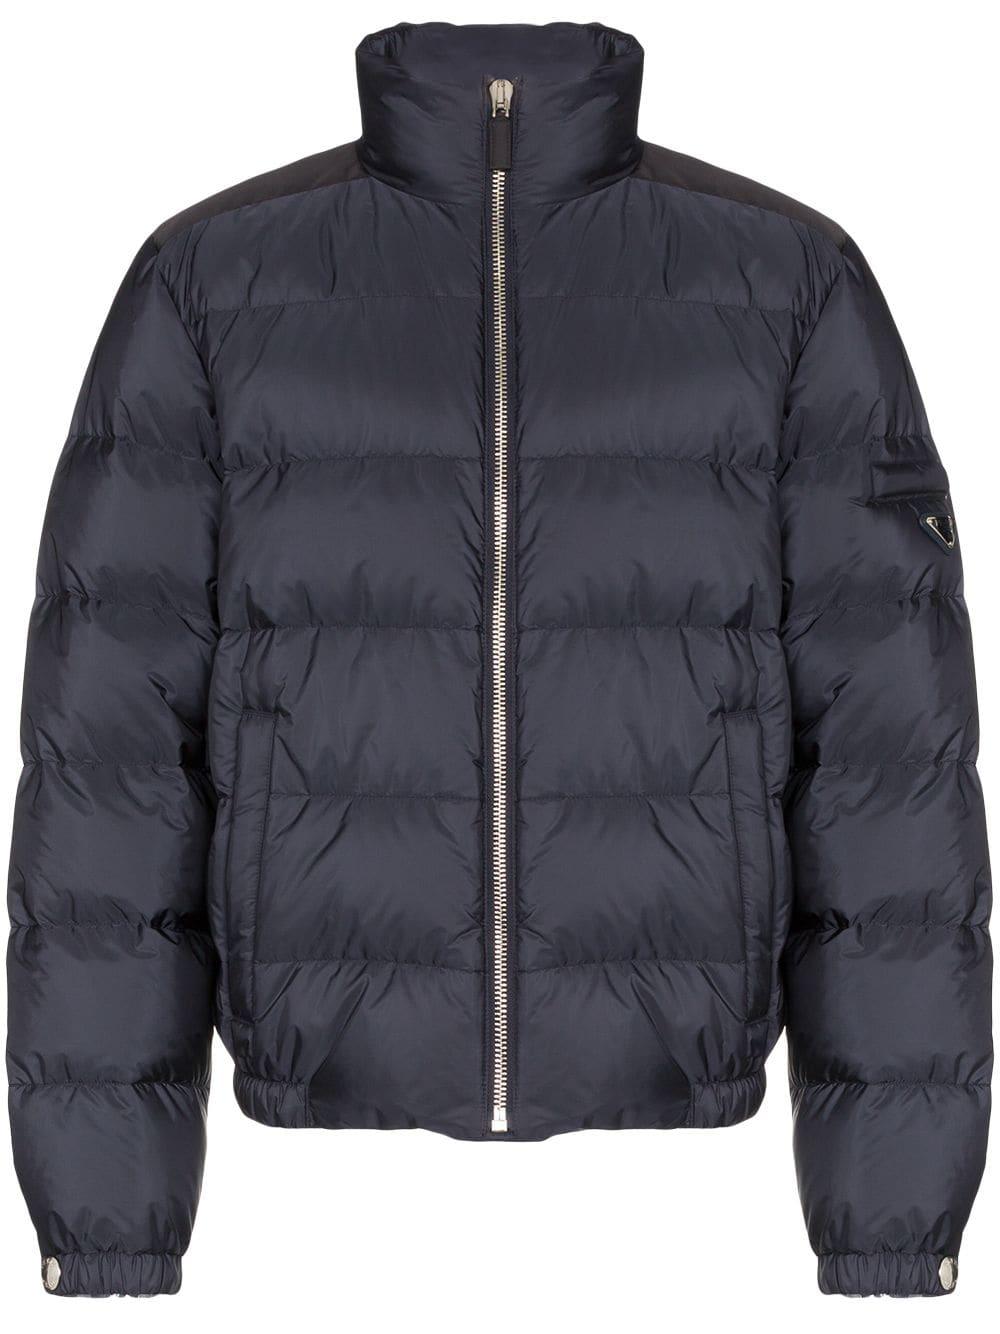 Prada Synthetic Shell Puffer Jacket in Blue for Men - Lyst